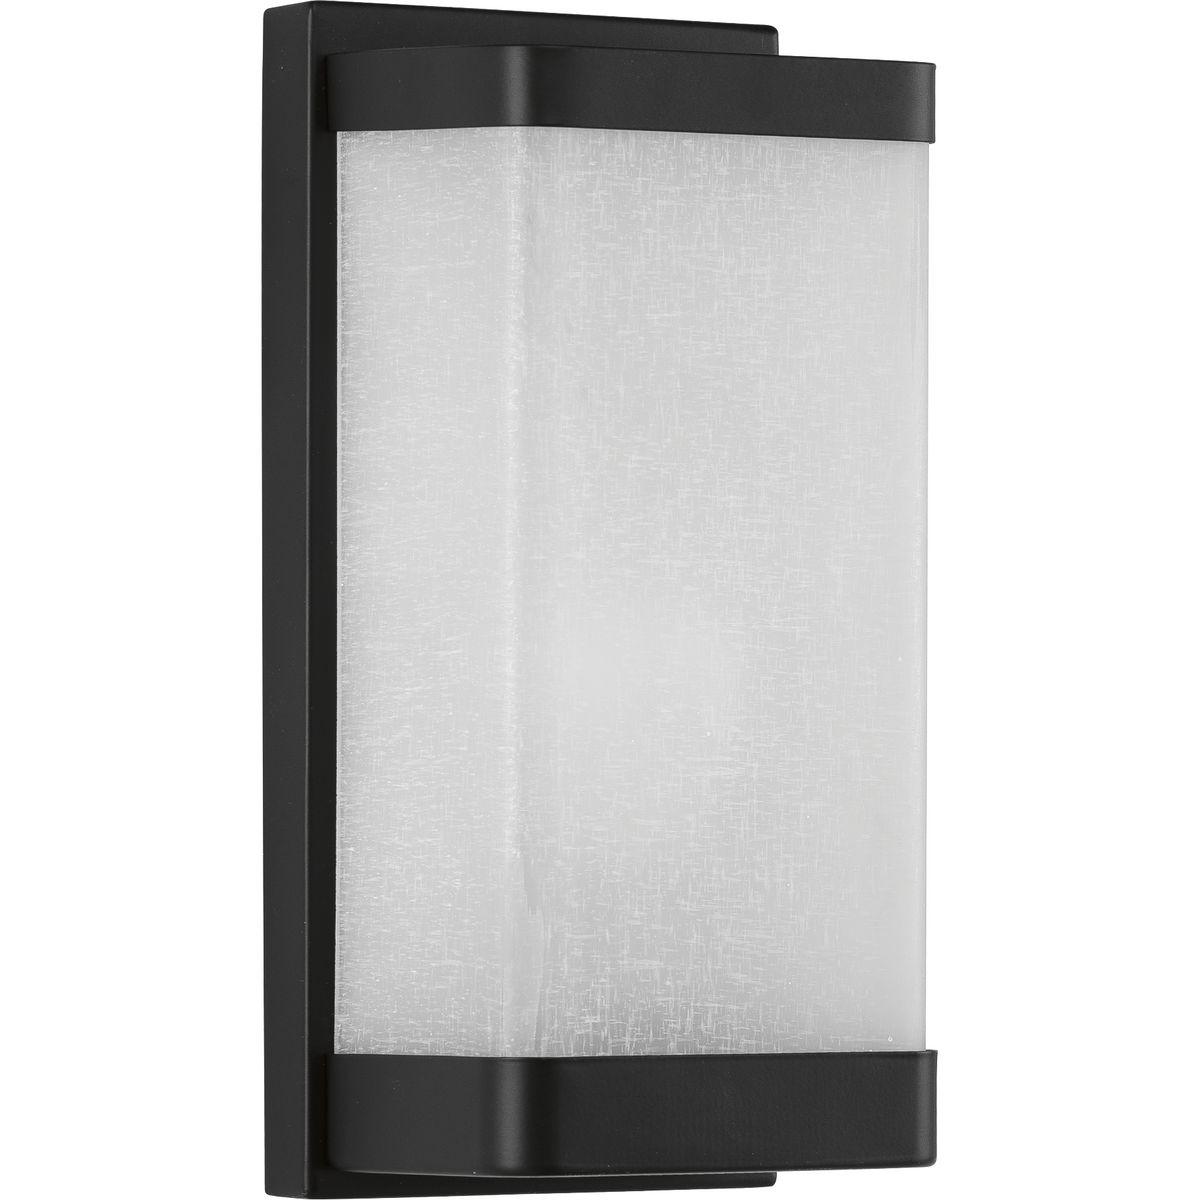 Hubbell P710072-031 A confident, bold Black frame supports an etched glass shade in the Linen Glass Sconce. With clean lines and a simple, rectangular shape, the fixture’s modern form is ideal for adding soft, comfortable light as desired in any transitional setting.  ; Simp